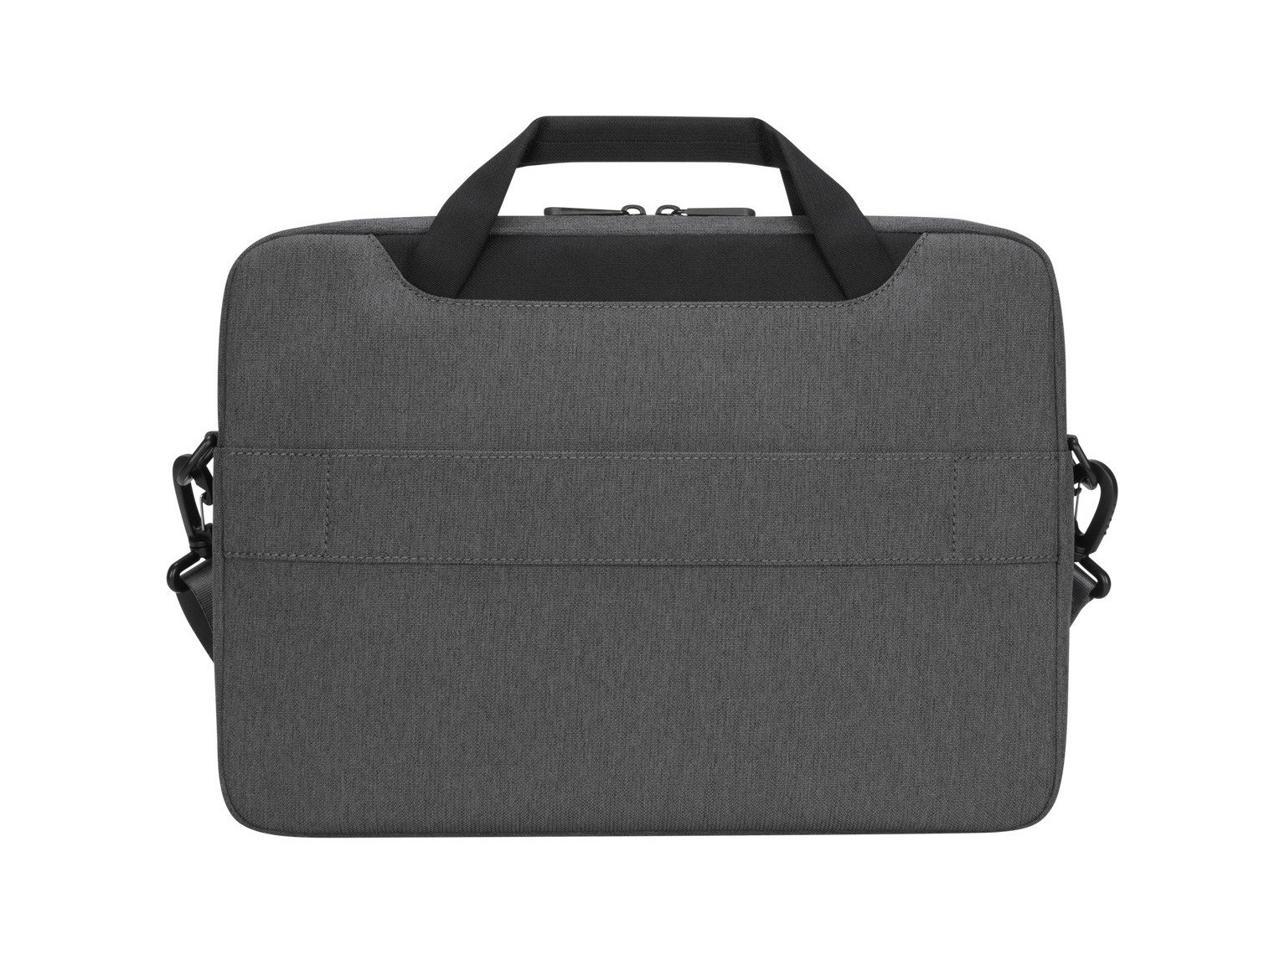 Targus Cypress Tbs92602gl Carrying Case (Slipcase) For 13" To 14" Notebook - Gray